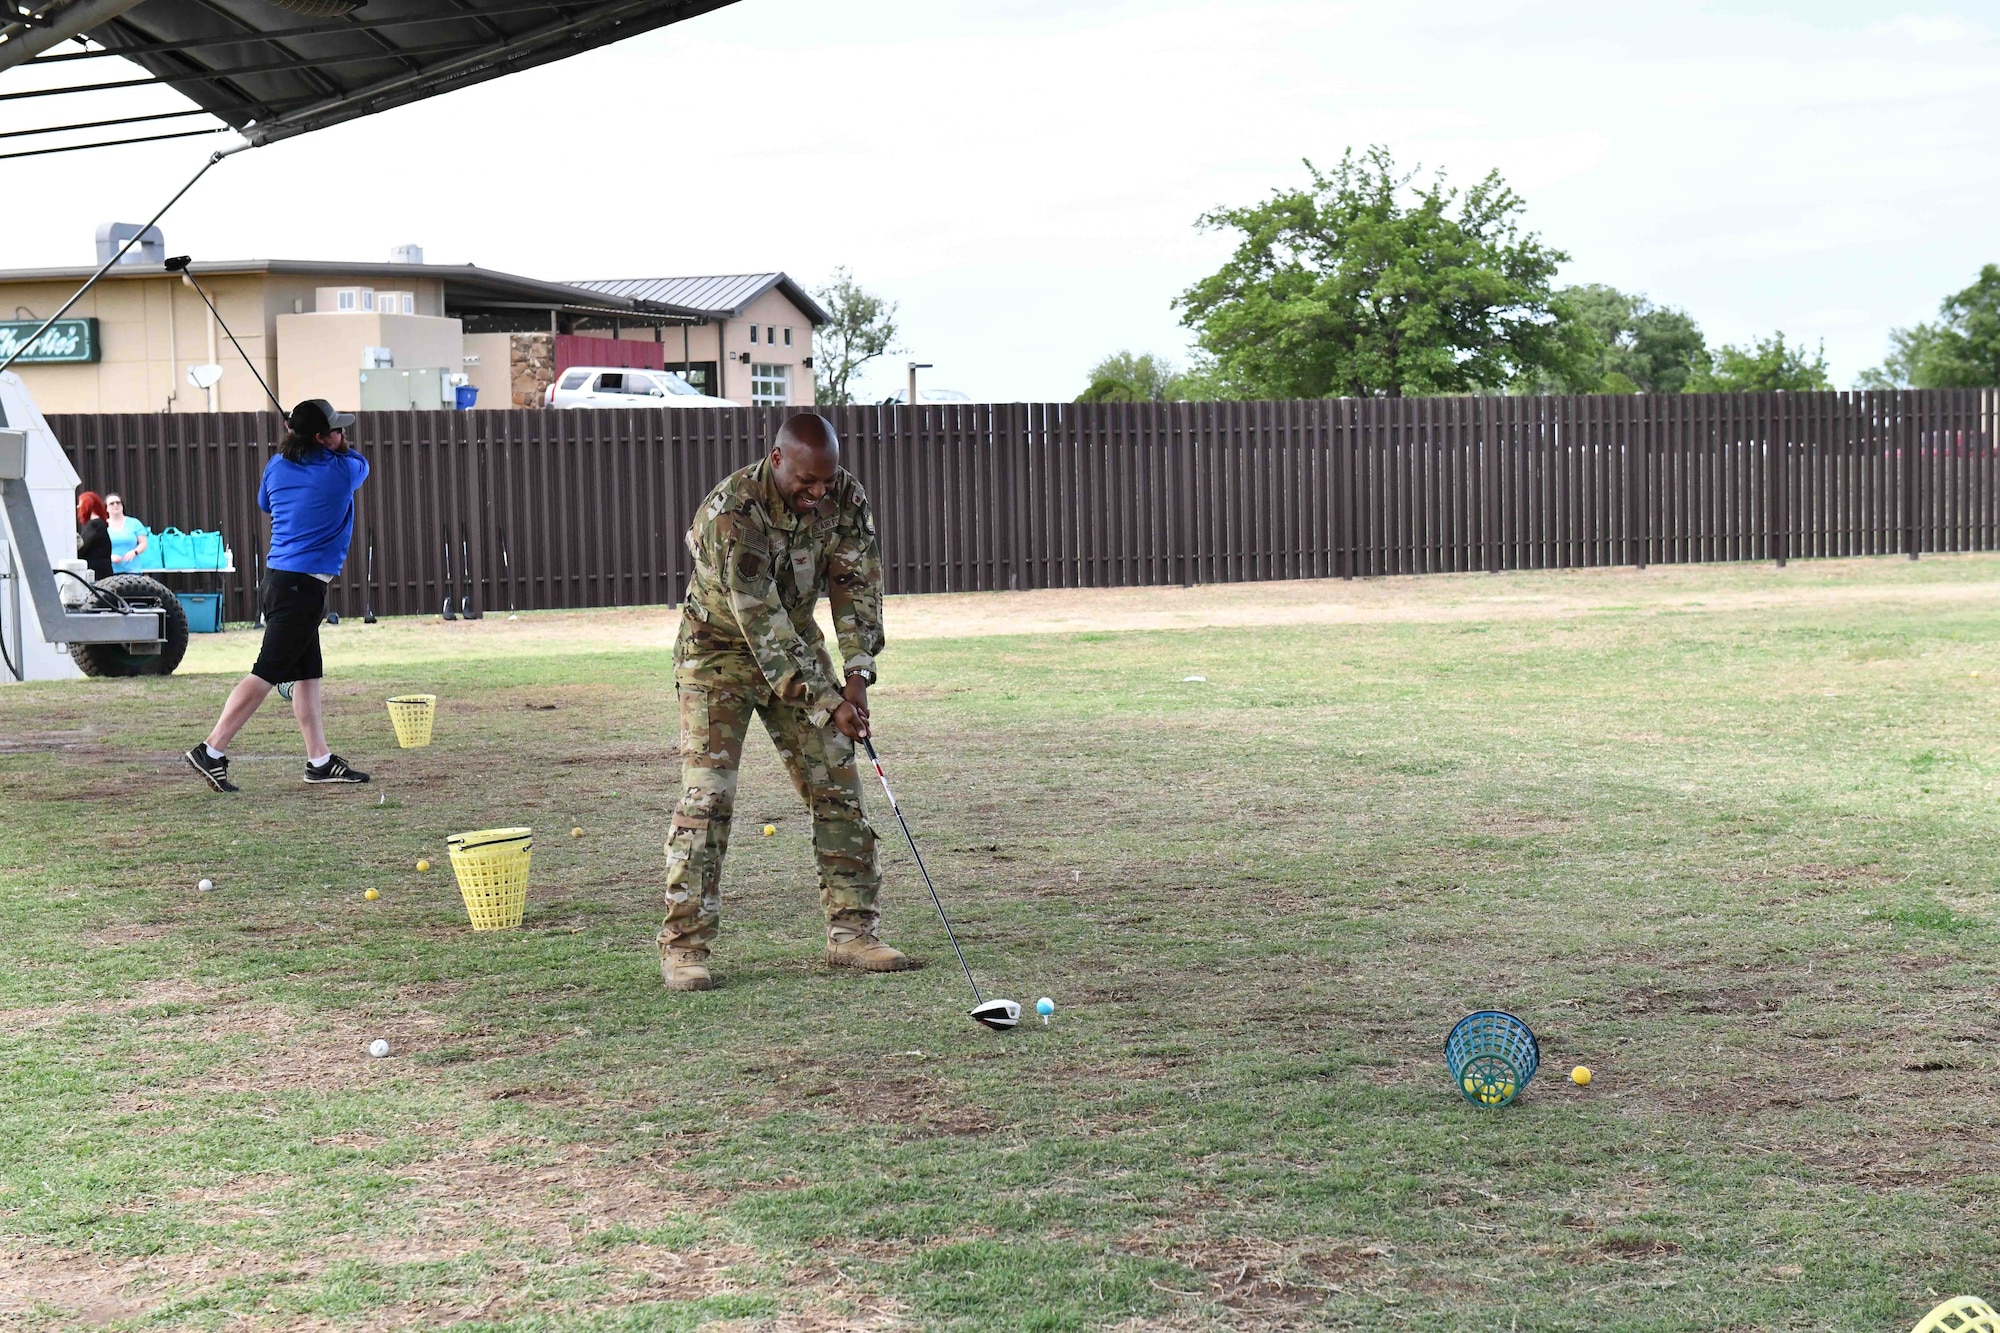 U.S. Air Force Col. Patrick Brady-Lee, 97th Air Mobility Wing vice commander, prepares to hit a golf ball during a “Driving Out Sexual Assault” event at Altus Air Force Base, Oklahoma, May 3,2023. More than 15 people signed the pledge to prevent sexual assault. (U.S. Air Force photo by Airman 1st Class Miyah Gray)